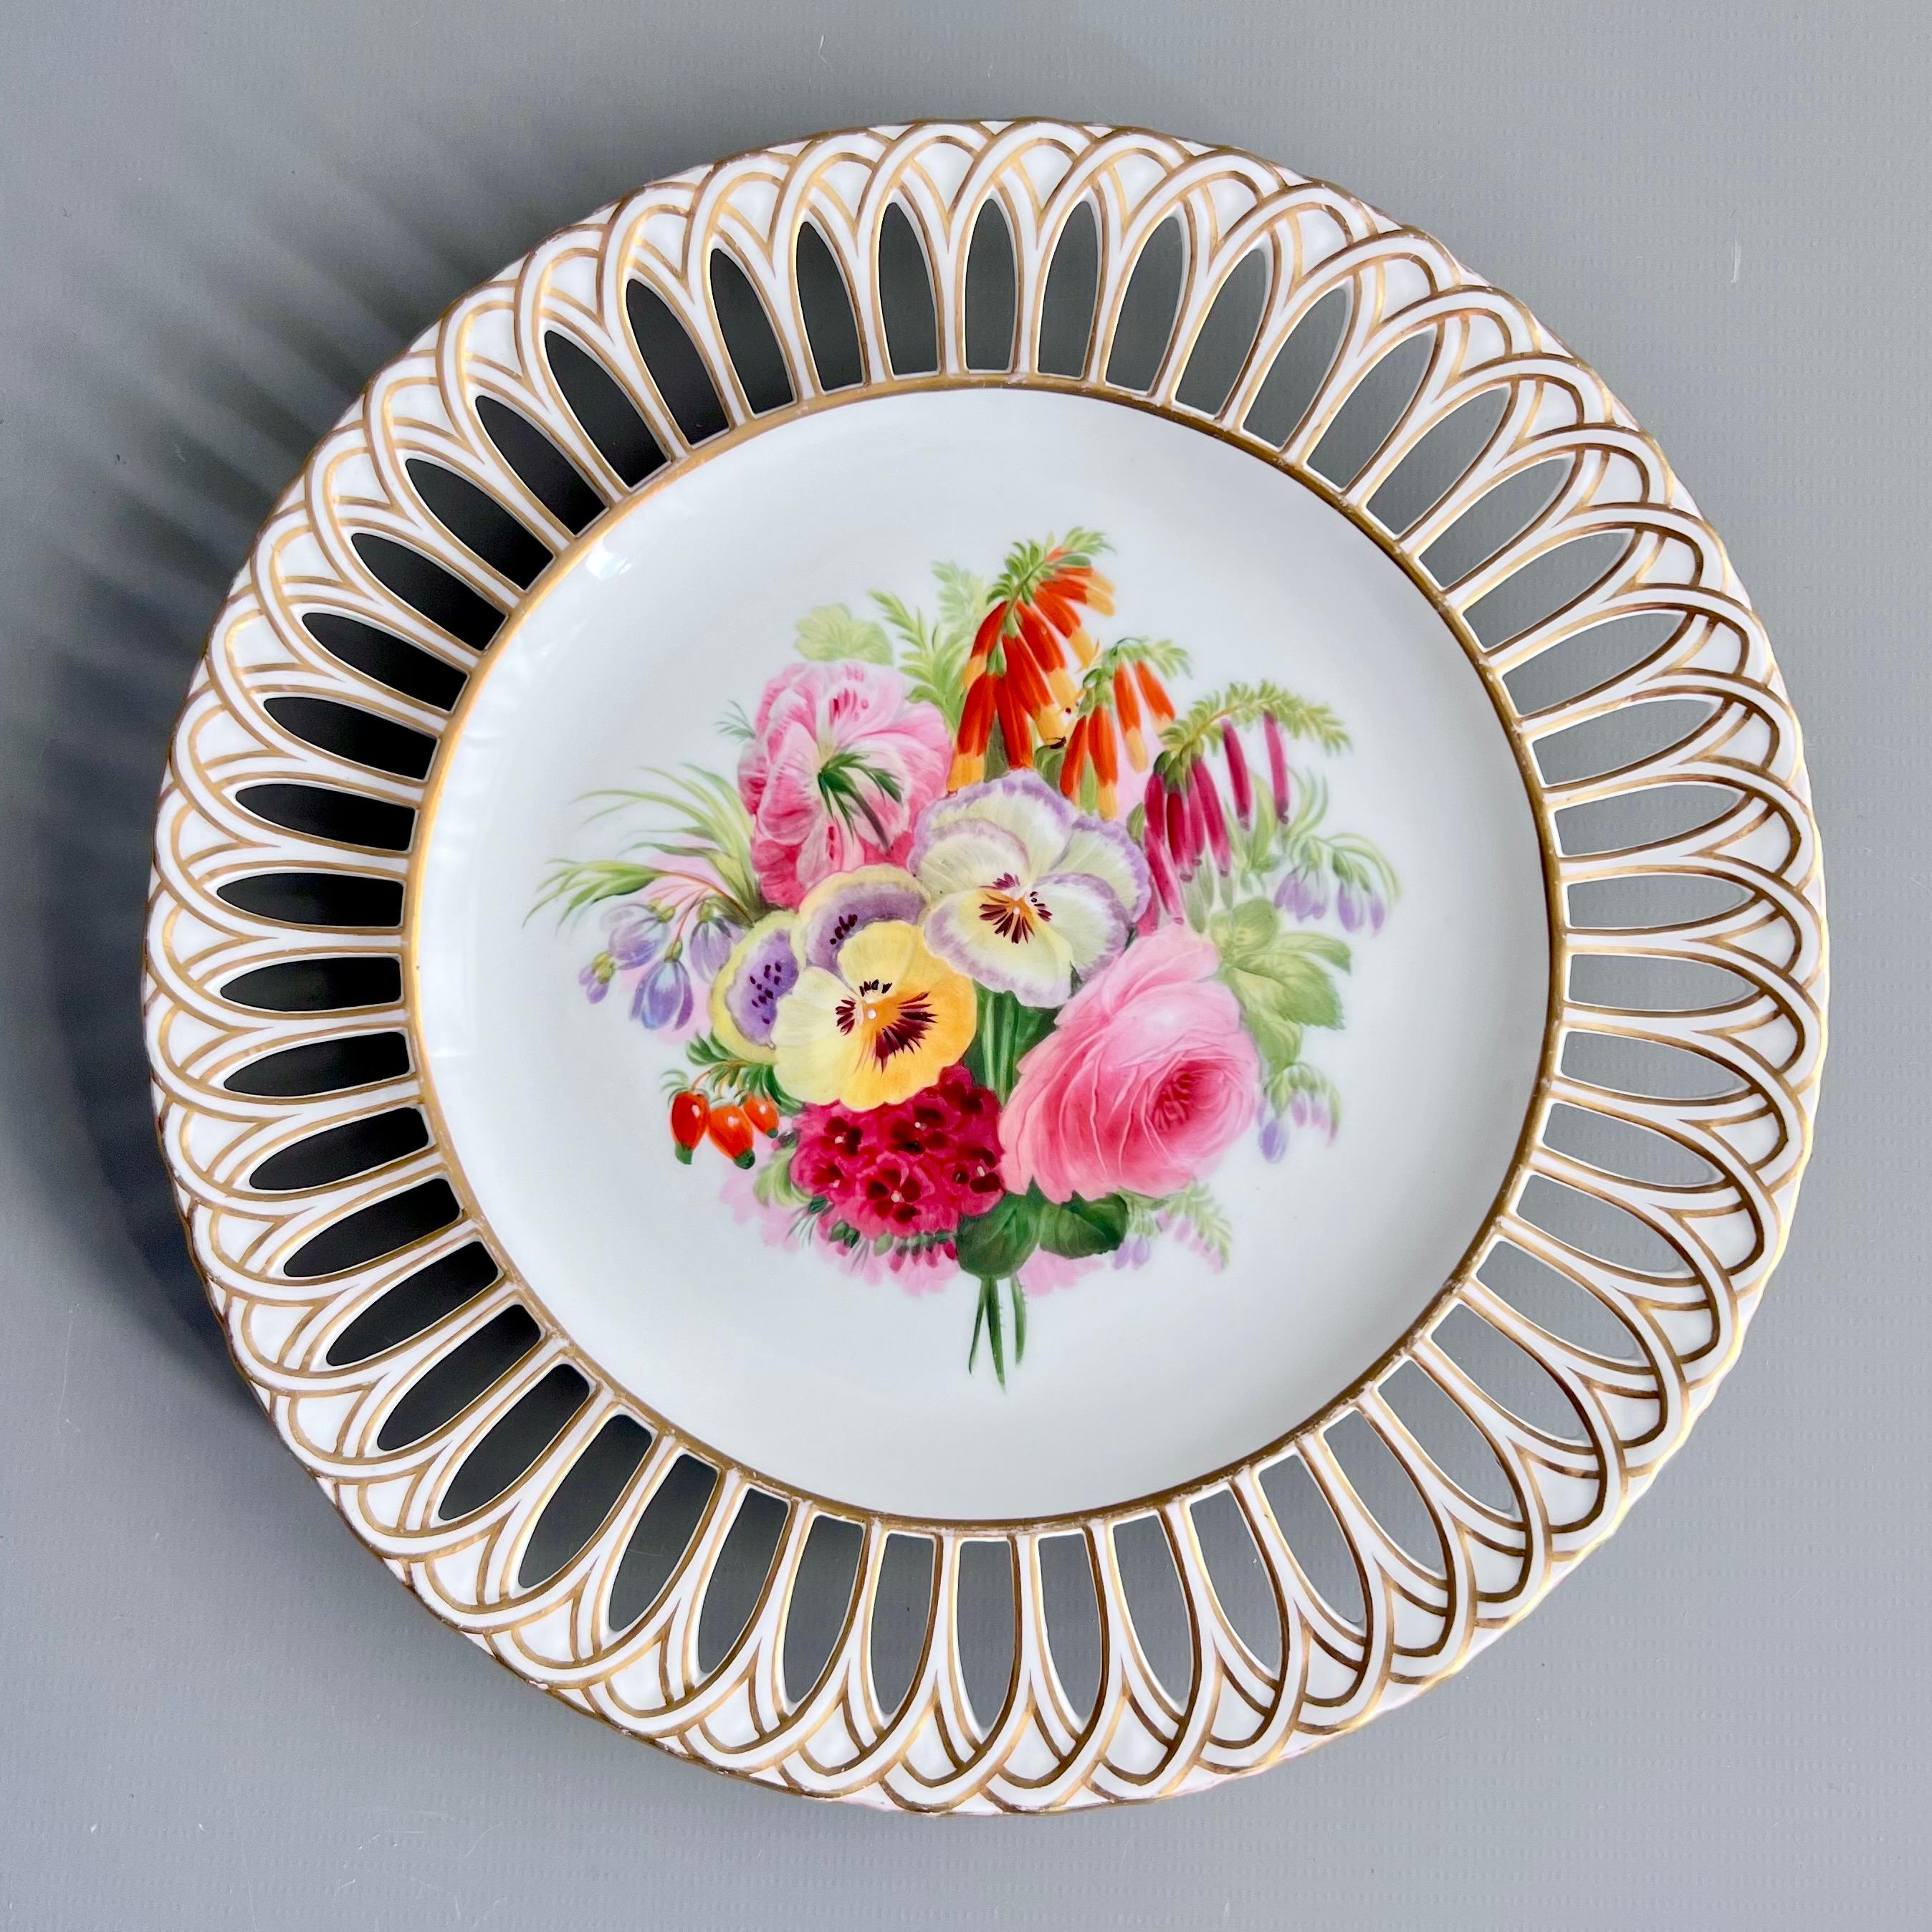 English Set of 8 Plates by Copeland, Reticulated, Sublime Flowers by Greatbatch, 1848 For Sale